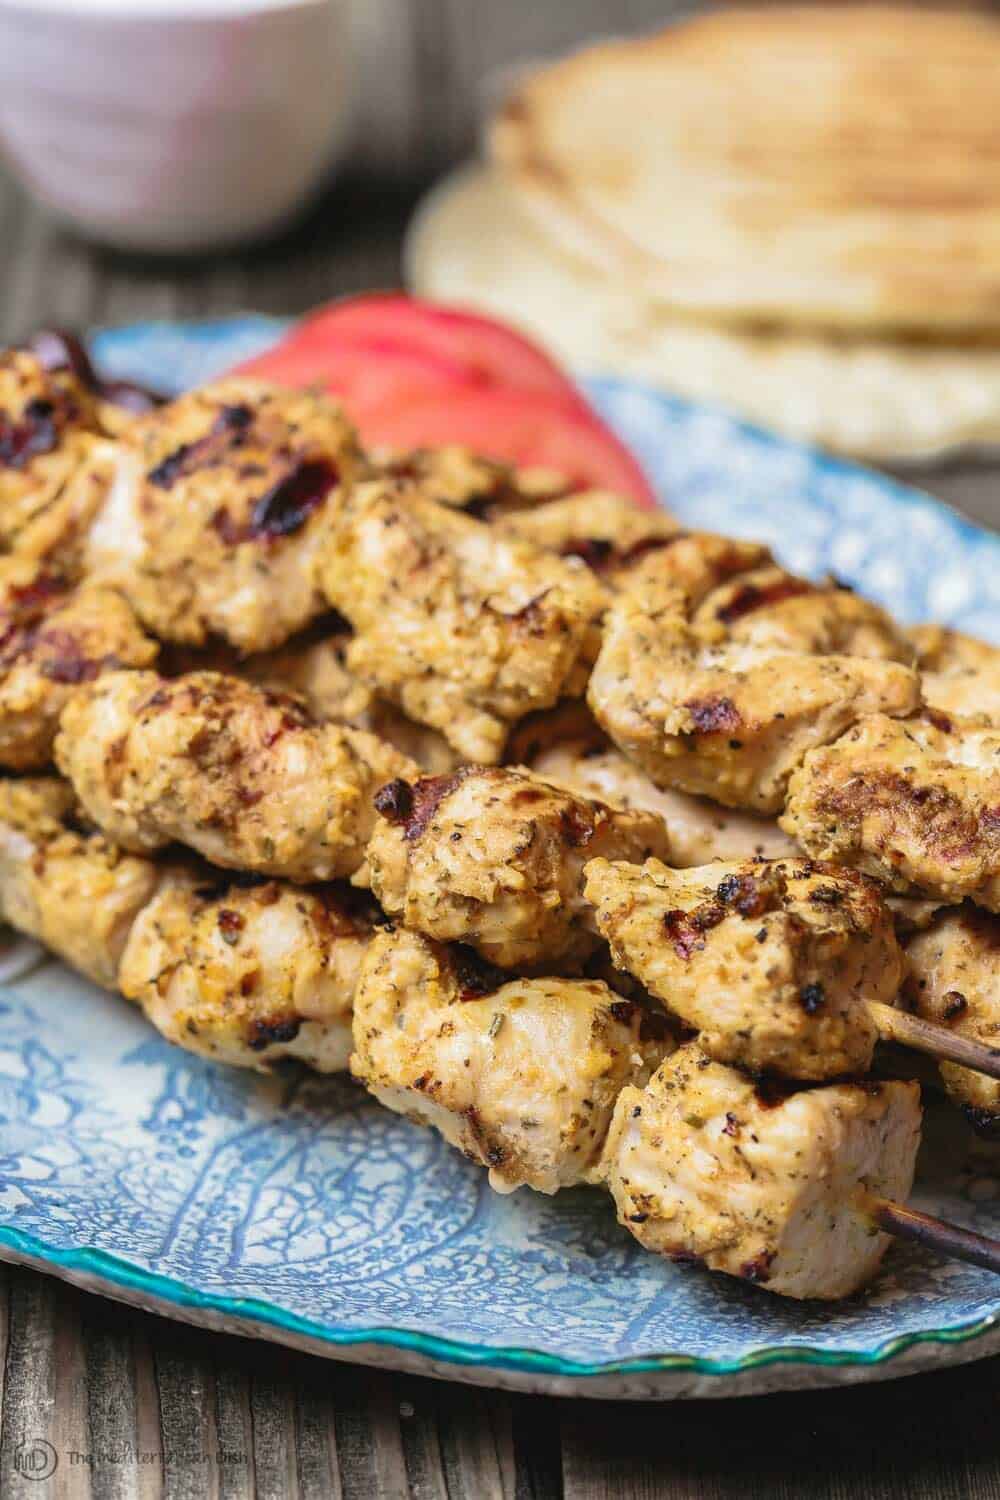 This homemade chicken souvlaki recipe takes you to the streets of Athens! Complete with the best souvlaki marinade; instructions for indoor or outdoor grilling; and what to serve with your souvlaki. Recipe from themediterraneandish.com #greekfood #souvlaki #kebab #kabob #chickensouvlaki #chickenkabob #mediterraneanfood #mediterraneandiet #mediterraneanrecipe #grilledchicken 